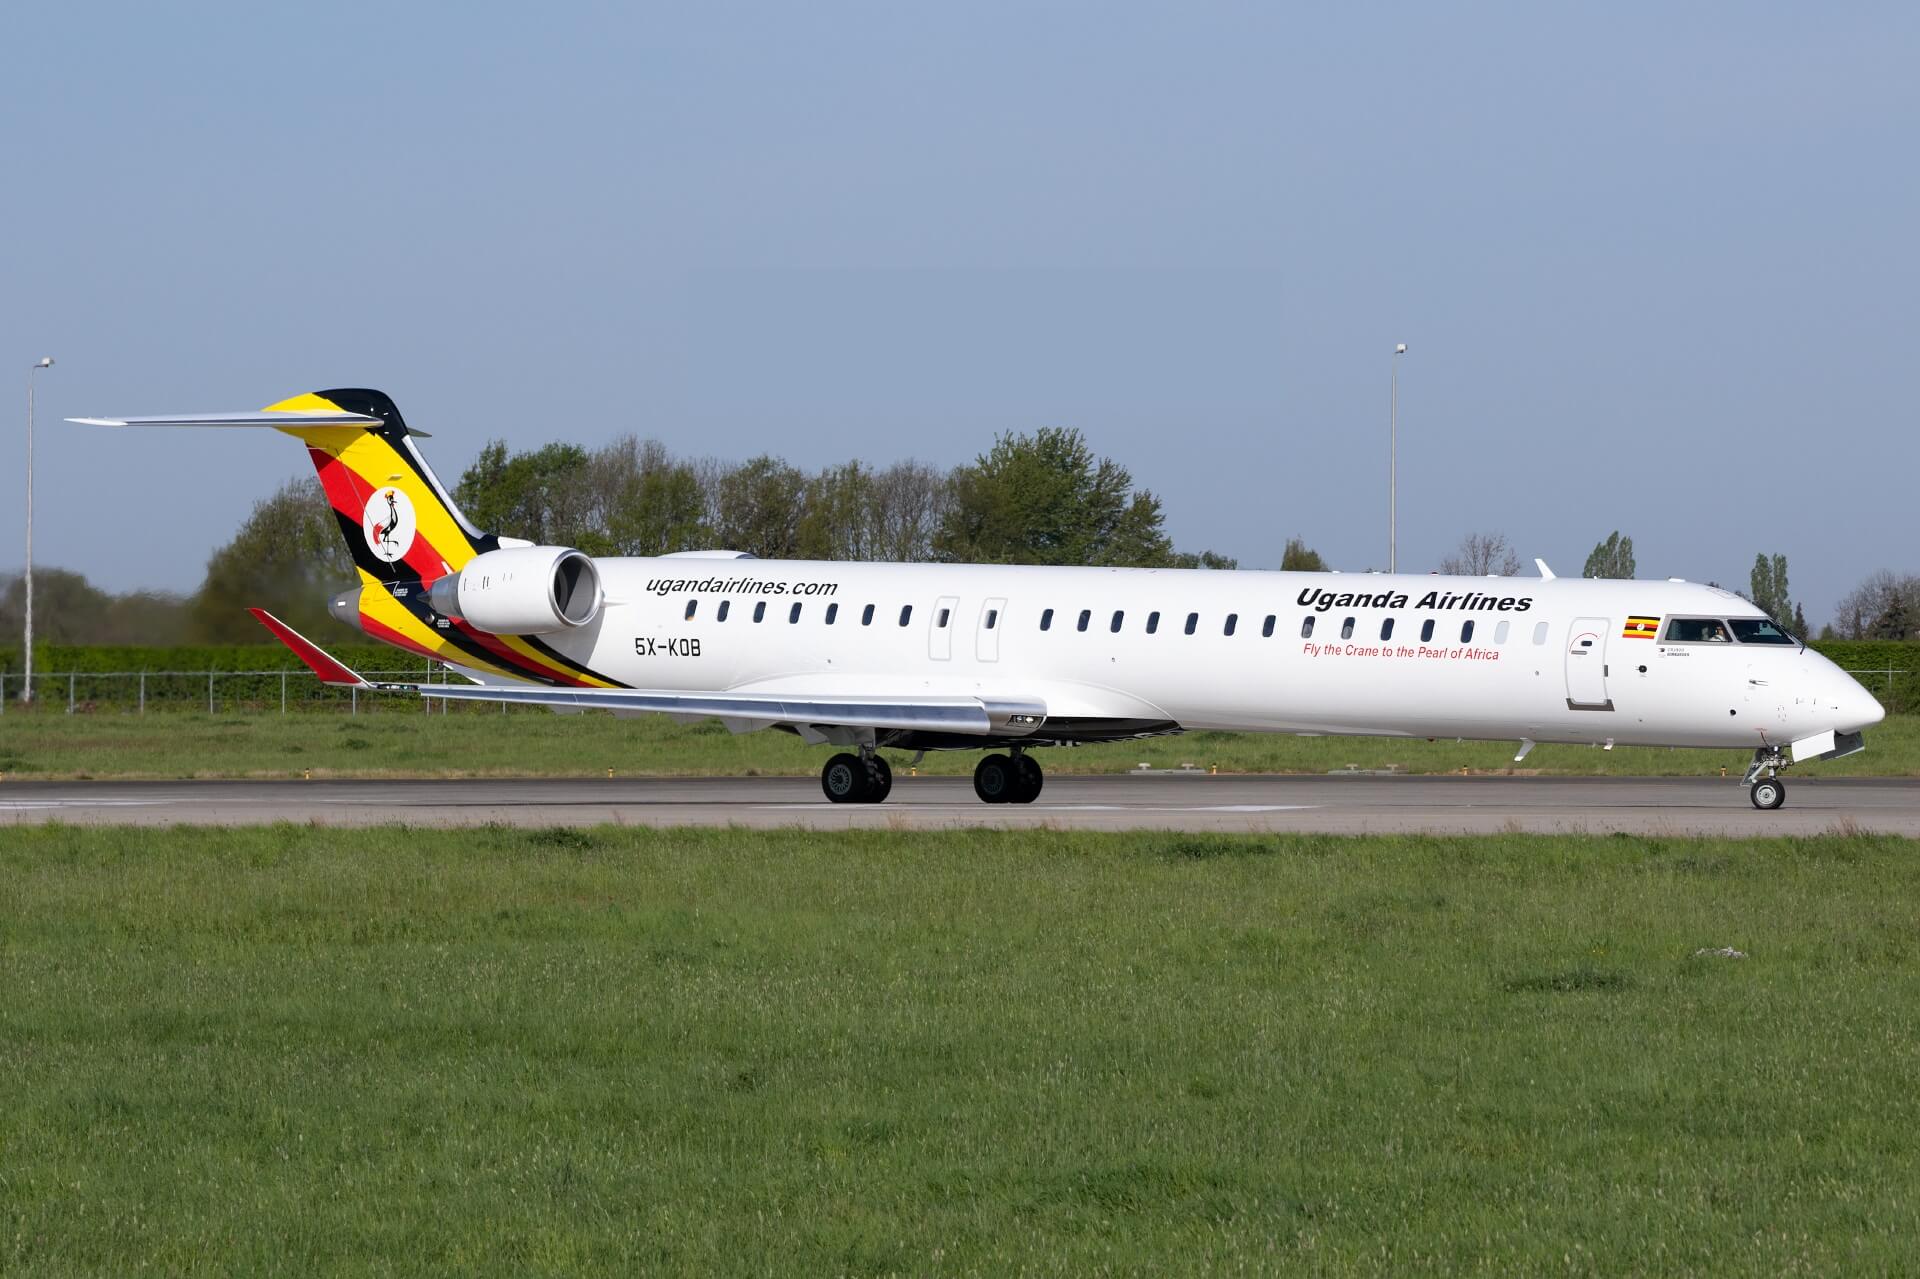 Uganda Airlines flights to Mombasa drawcard for gorilla tourism and regional trade